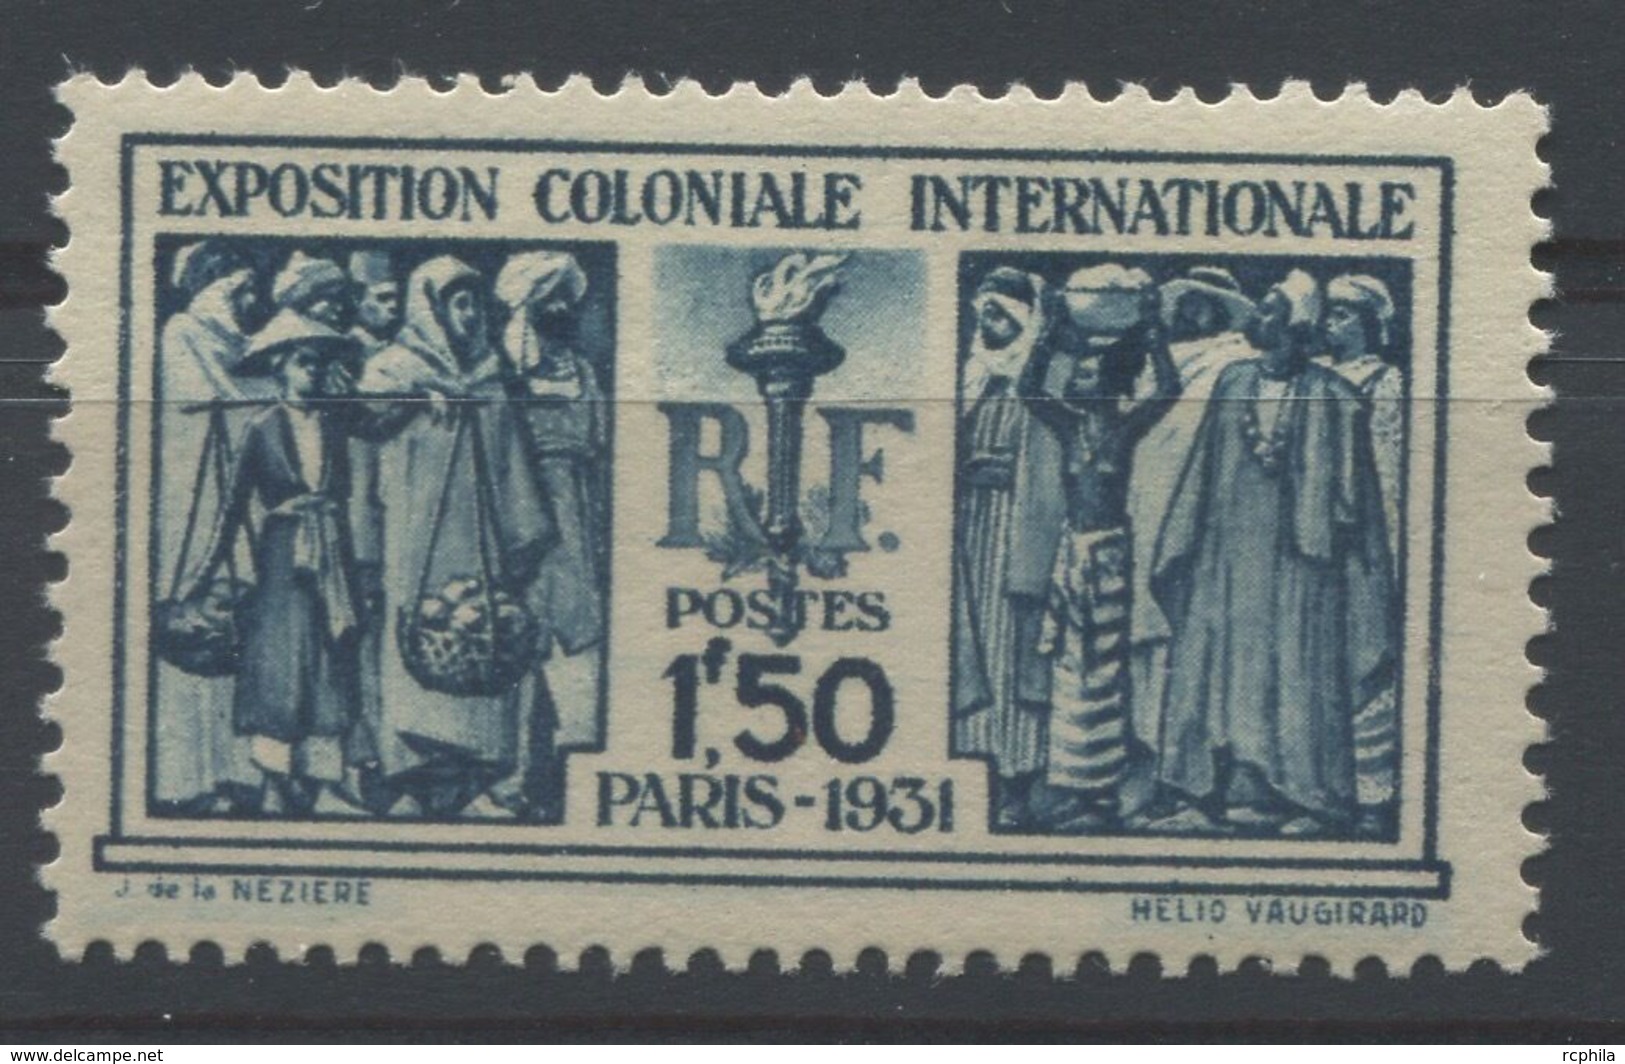 RC 15848 FRANCE N° 274 COTE 110€ - 1F50 BLEU EXPOSITION COLONIALE NEUF ** MNH TB - Neufs